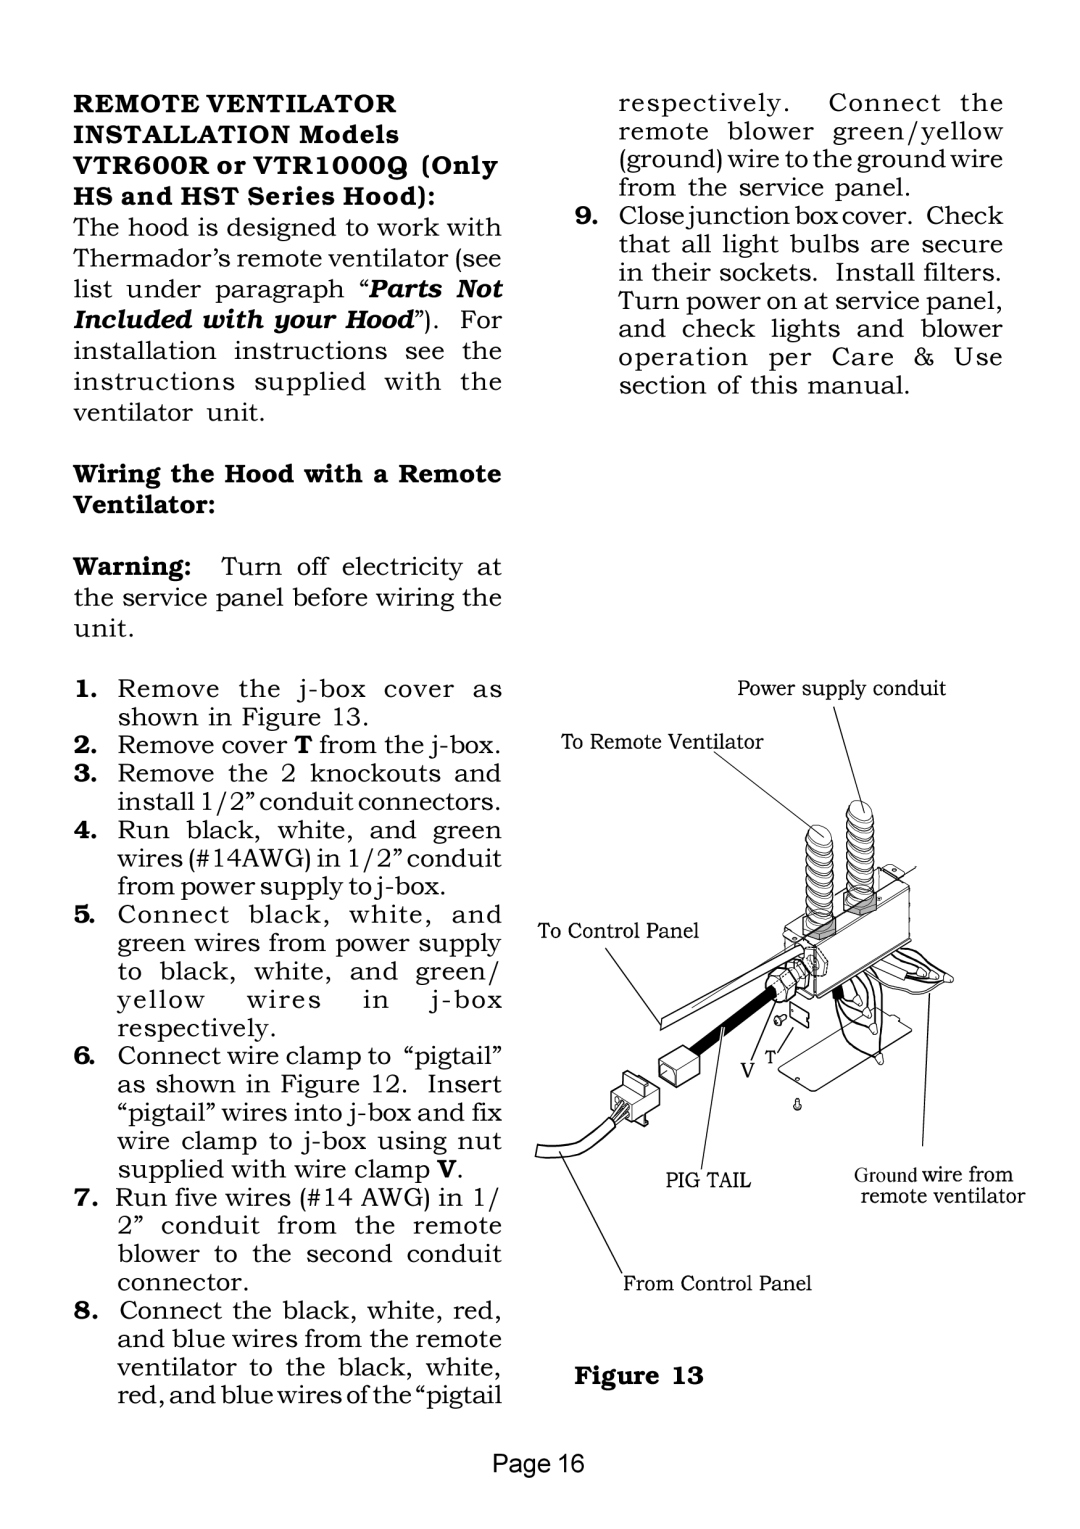 Thermador HS-HST-HSB installation instructions Wiring the Hood with a Remote Ventilator, Ground 